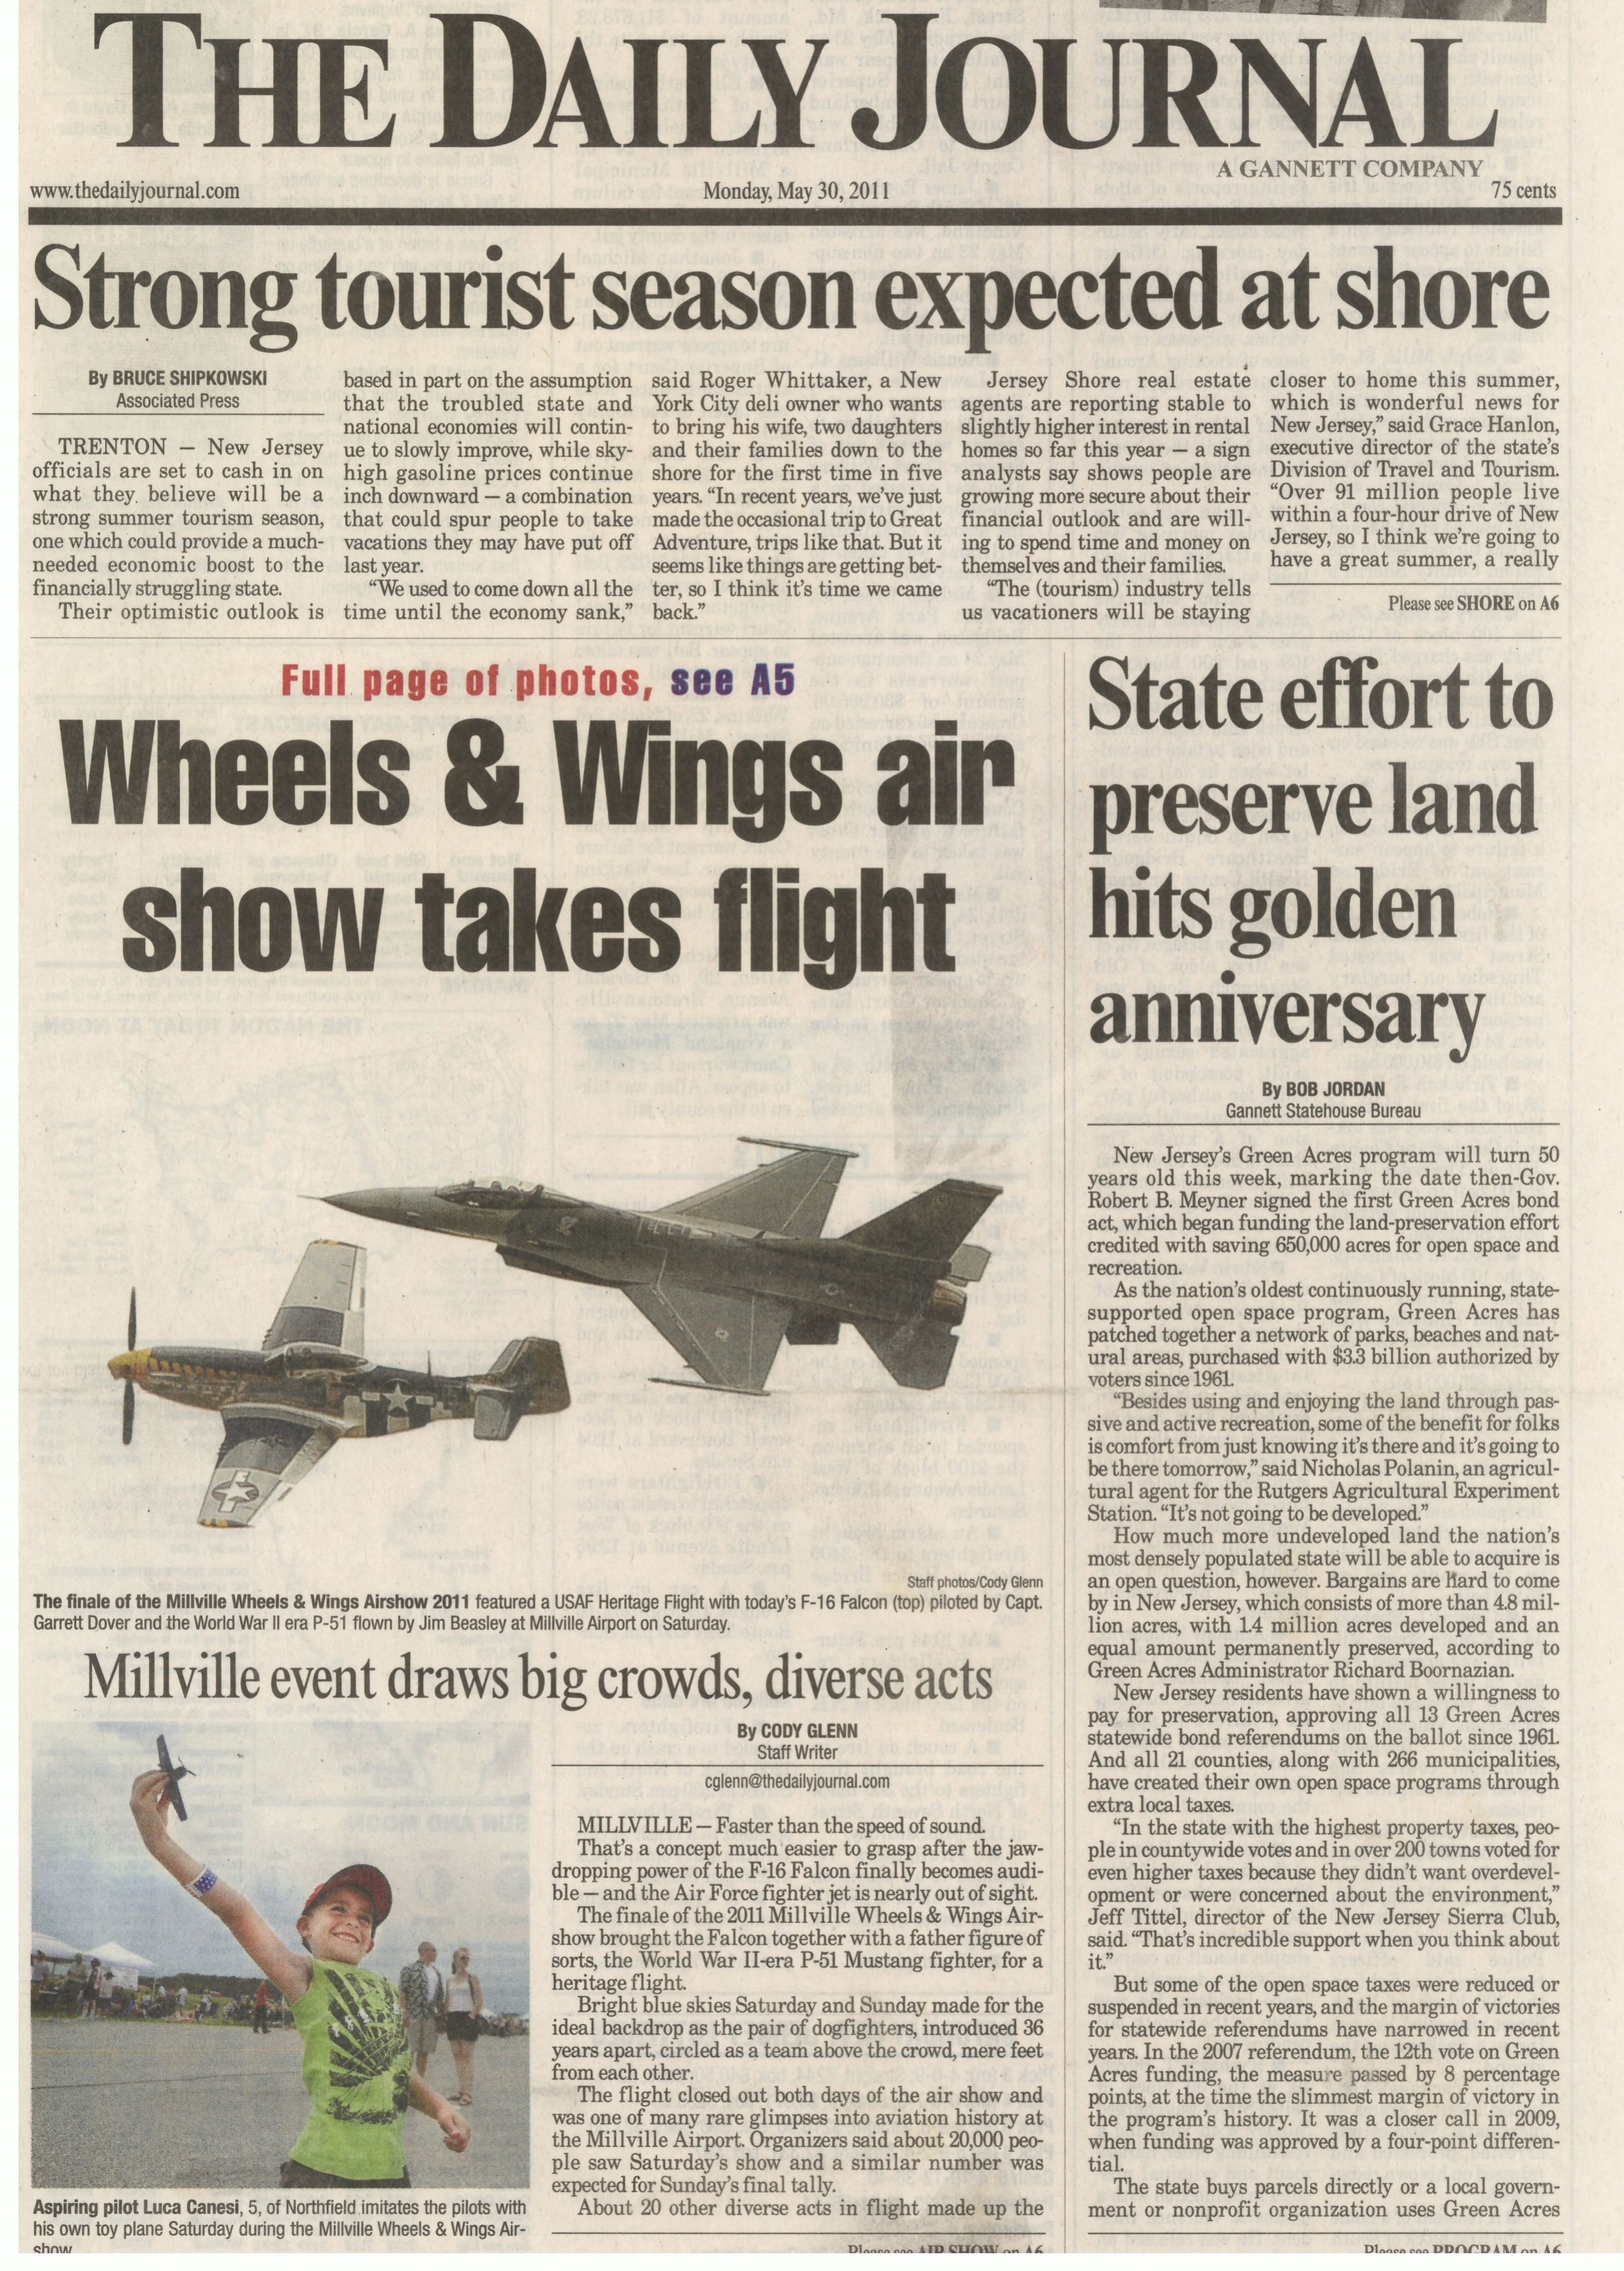  Heritage flight featuring a F-16 Falcon and WWII era P-51 at an air show in Millville May 30, 2011  / The Daily Journal  